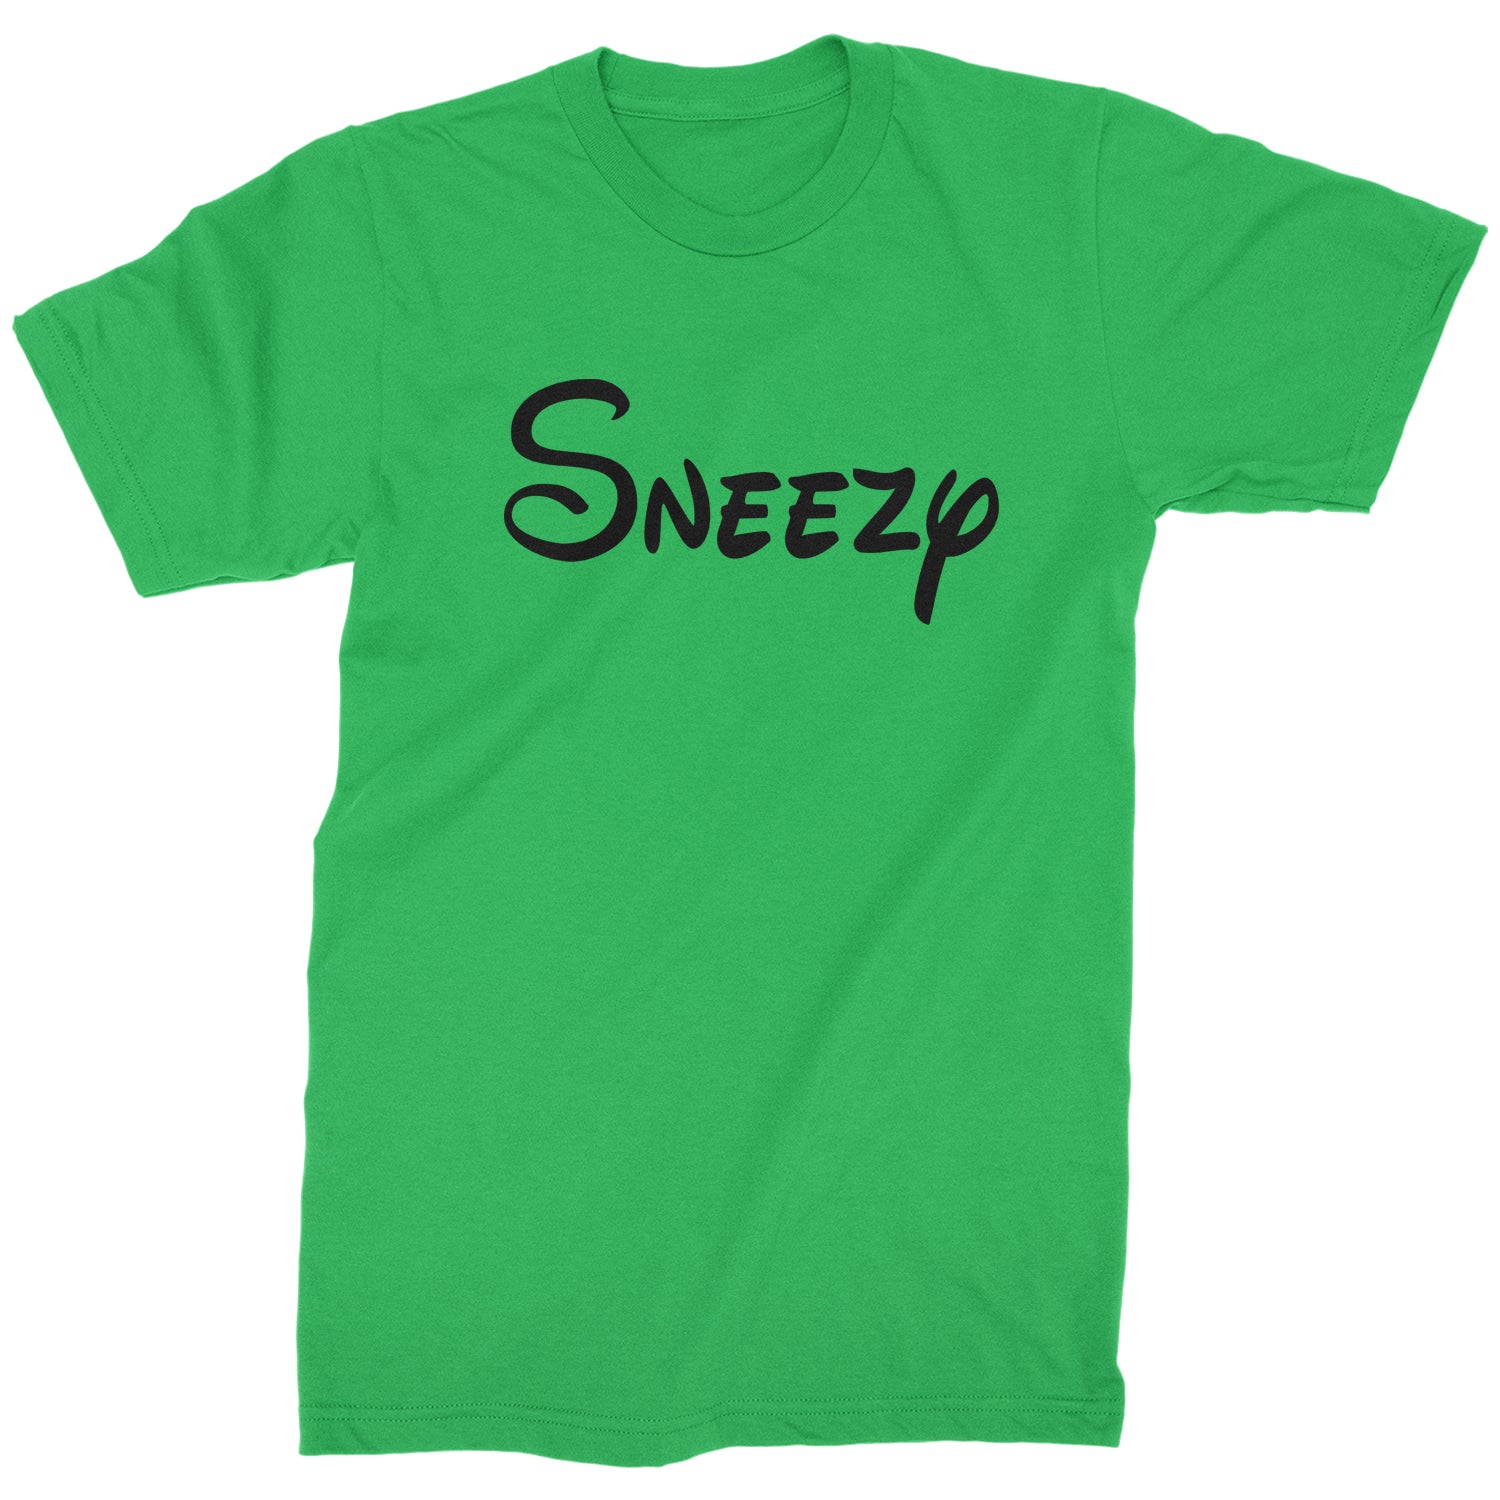 Sneezy - 7 Dwarfs Costume Mens T-shirt and, costume, dwarfs, group, halloween, matching, seven, snow, the, white by Expression Tees